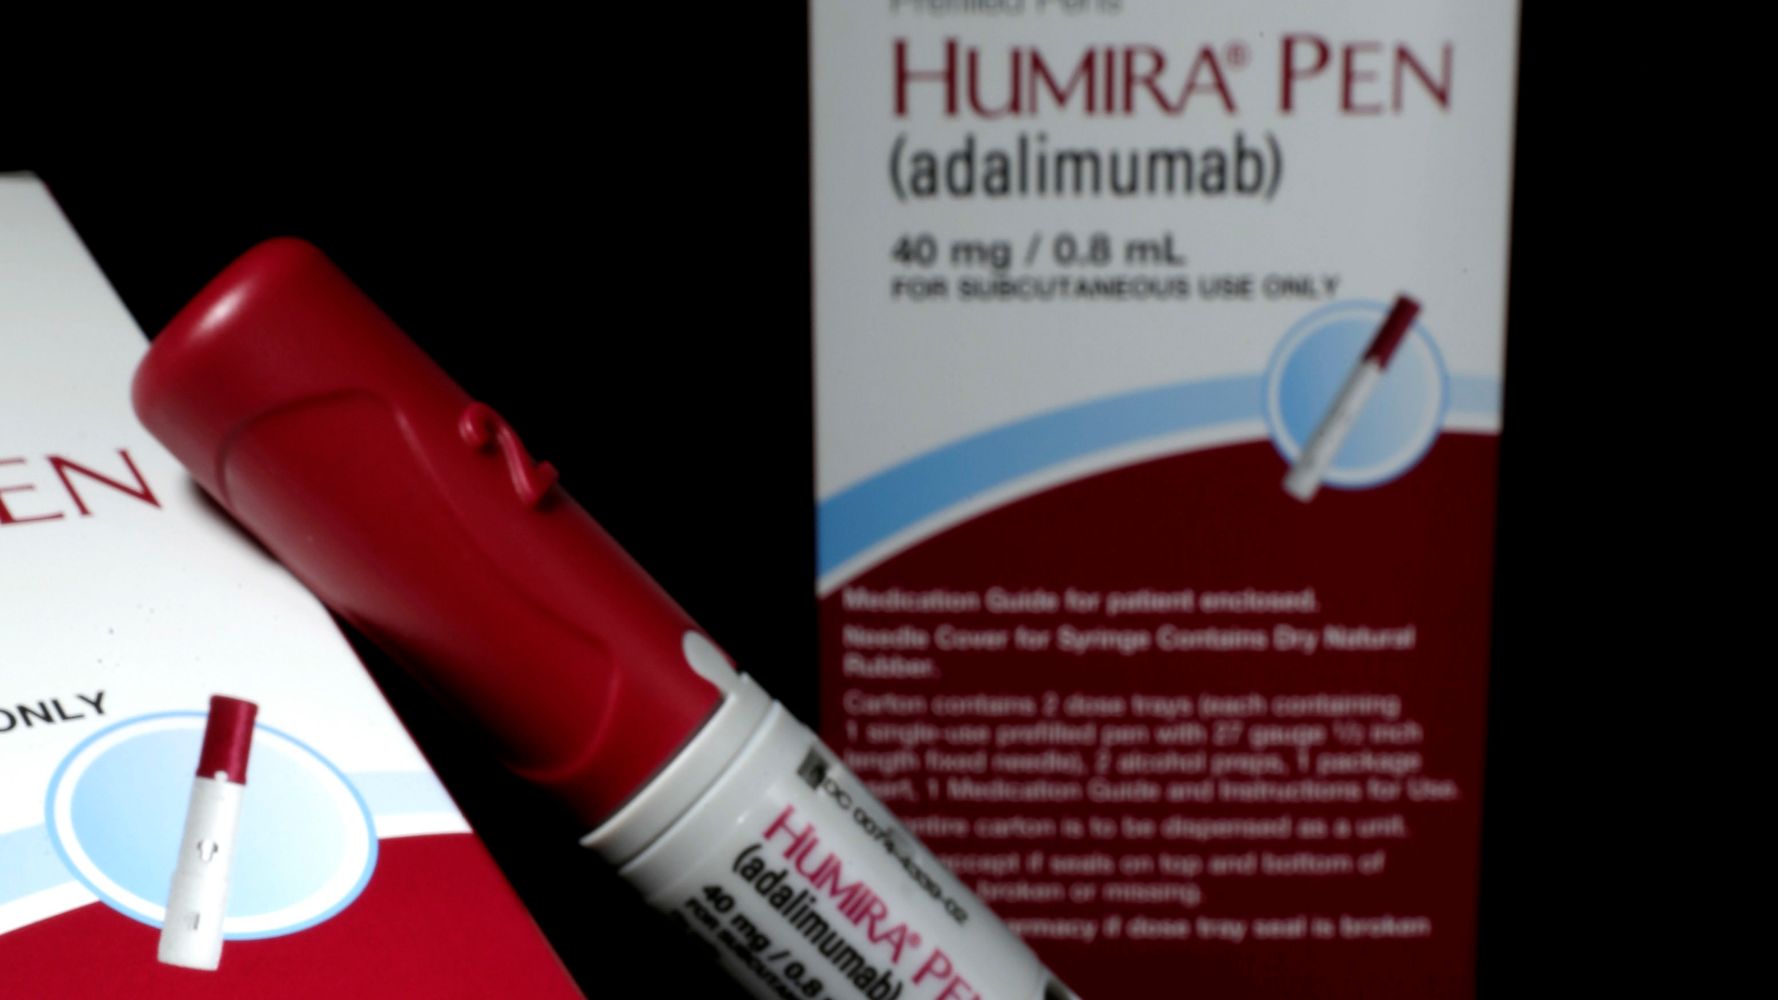 a-humira-prescription-costs-38-000-a-year-because-our-patent-system-is